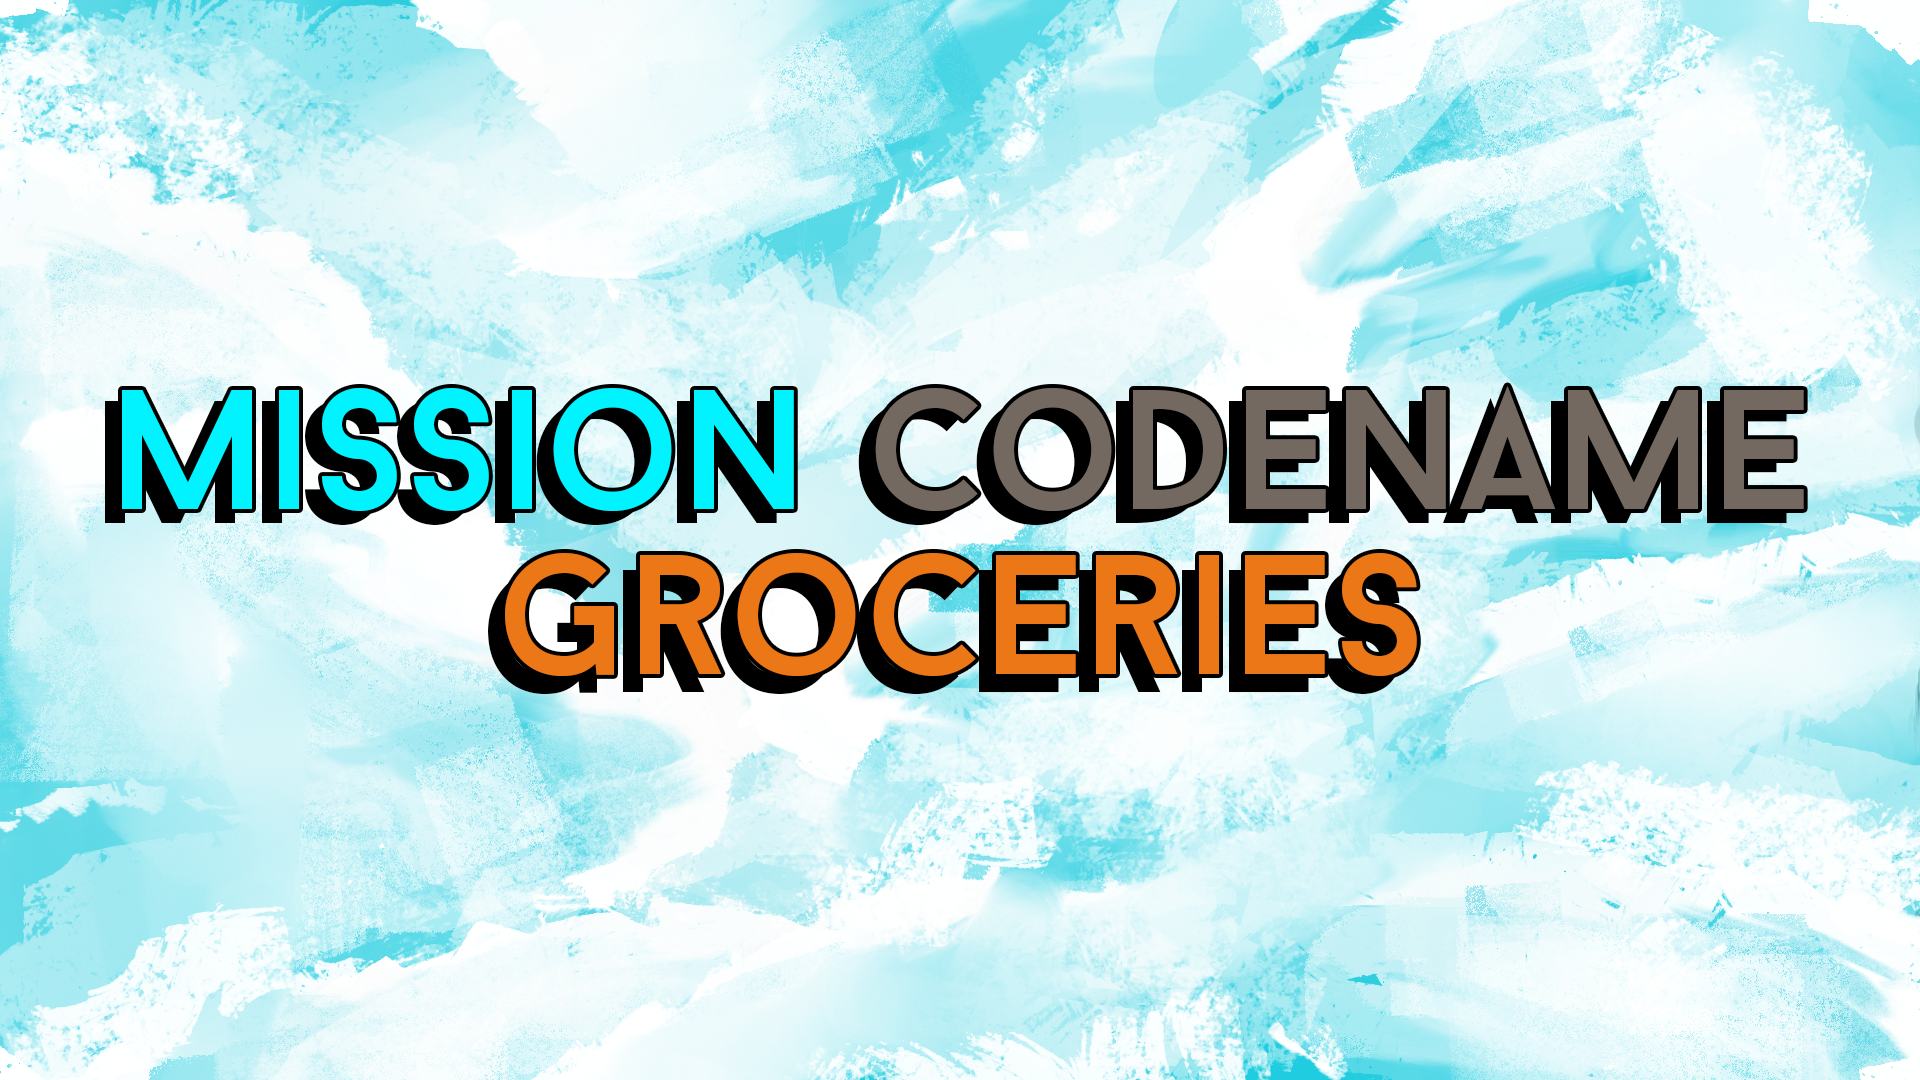 Mission Codename Groceries